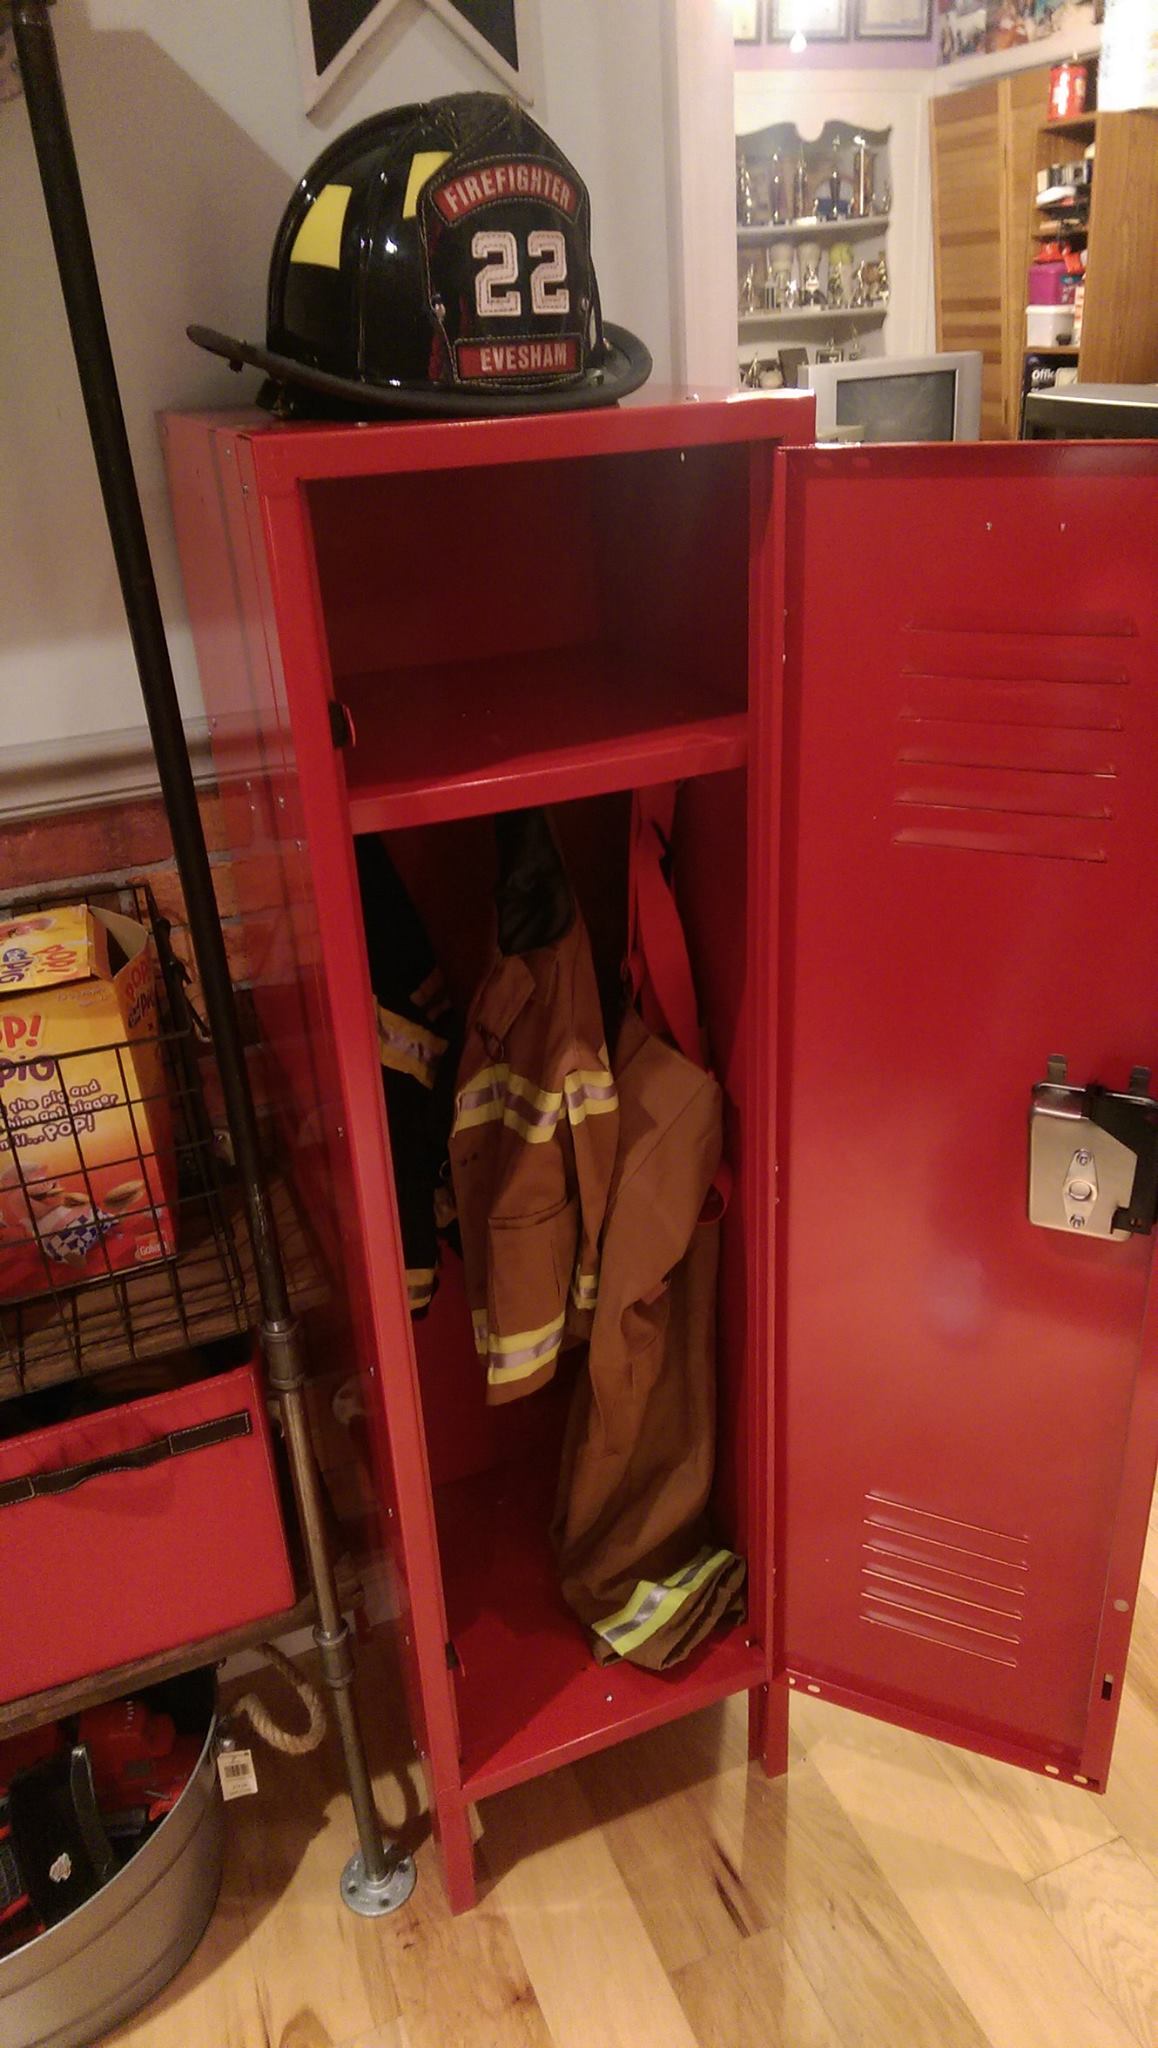 A locker for his turnout gear